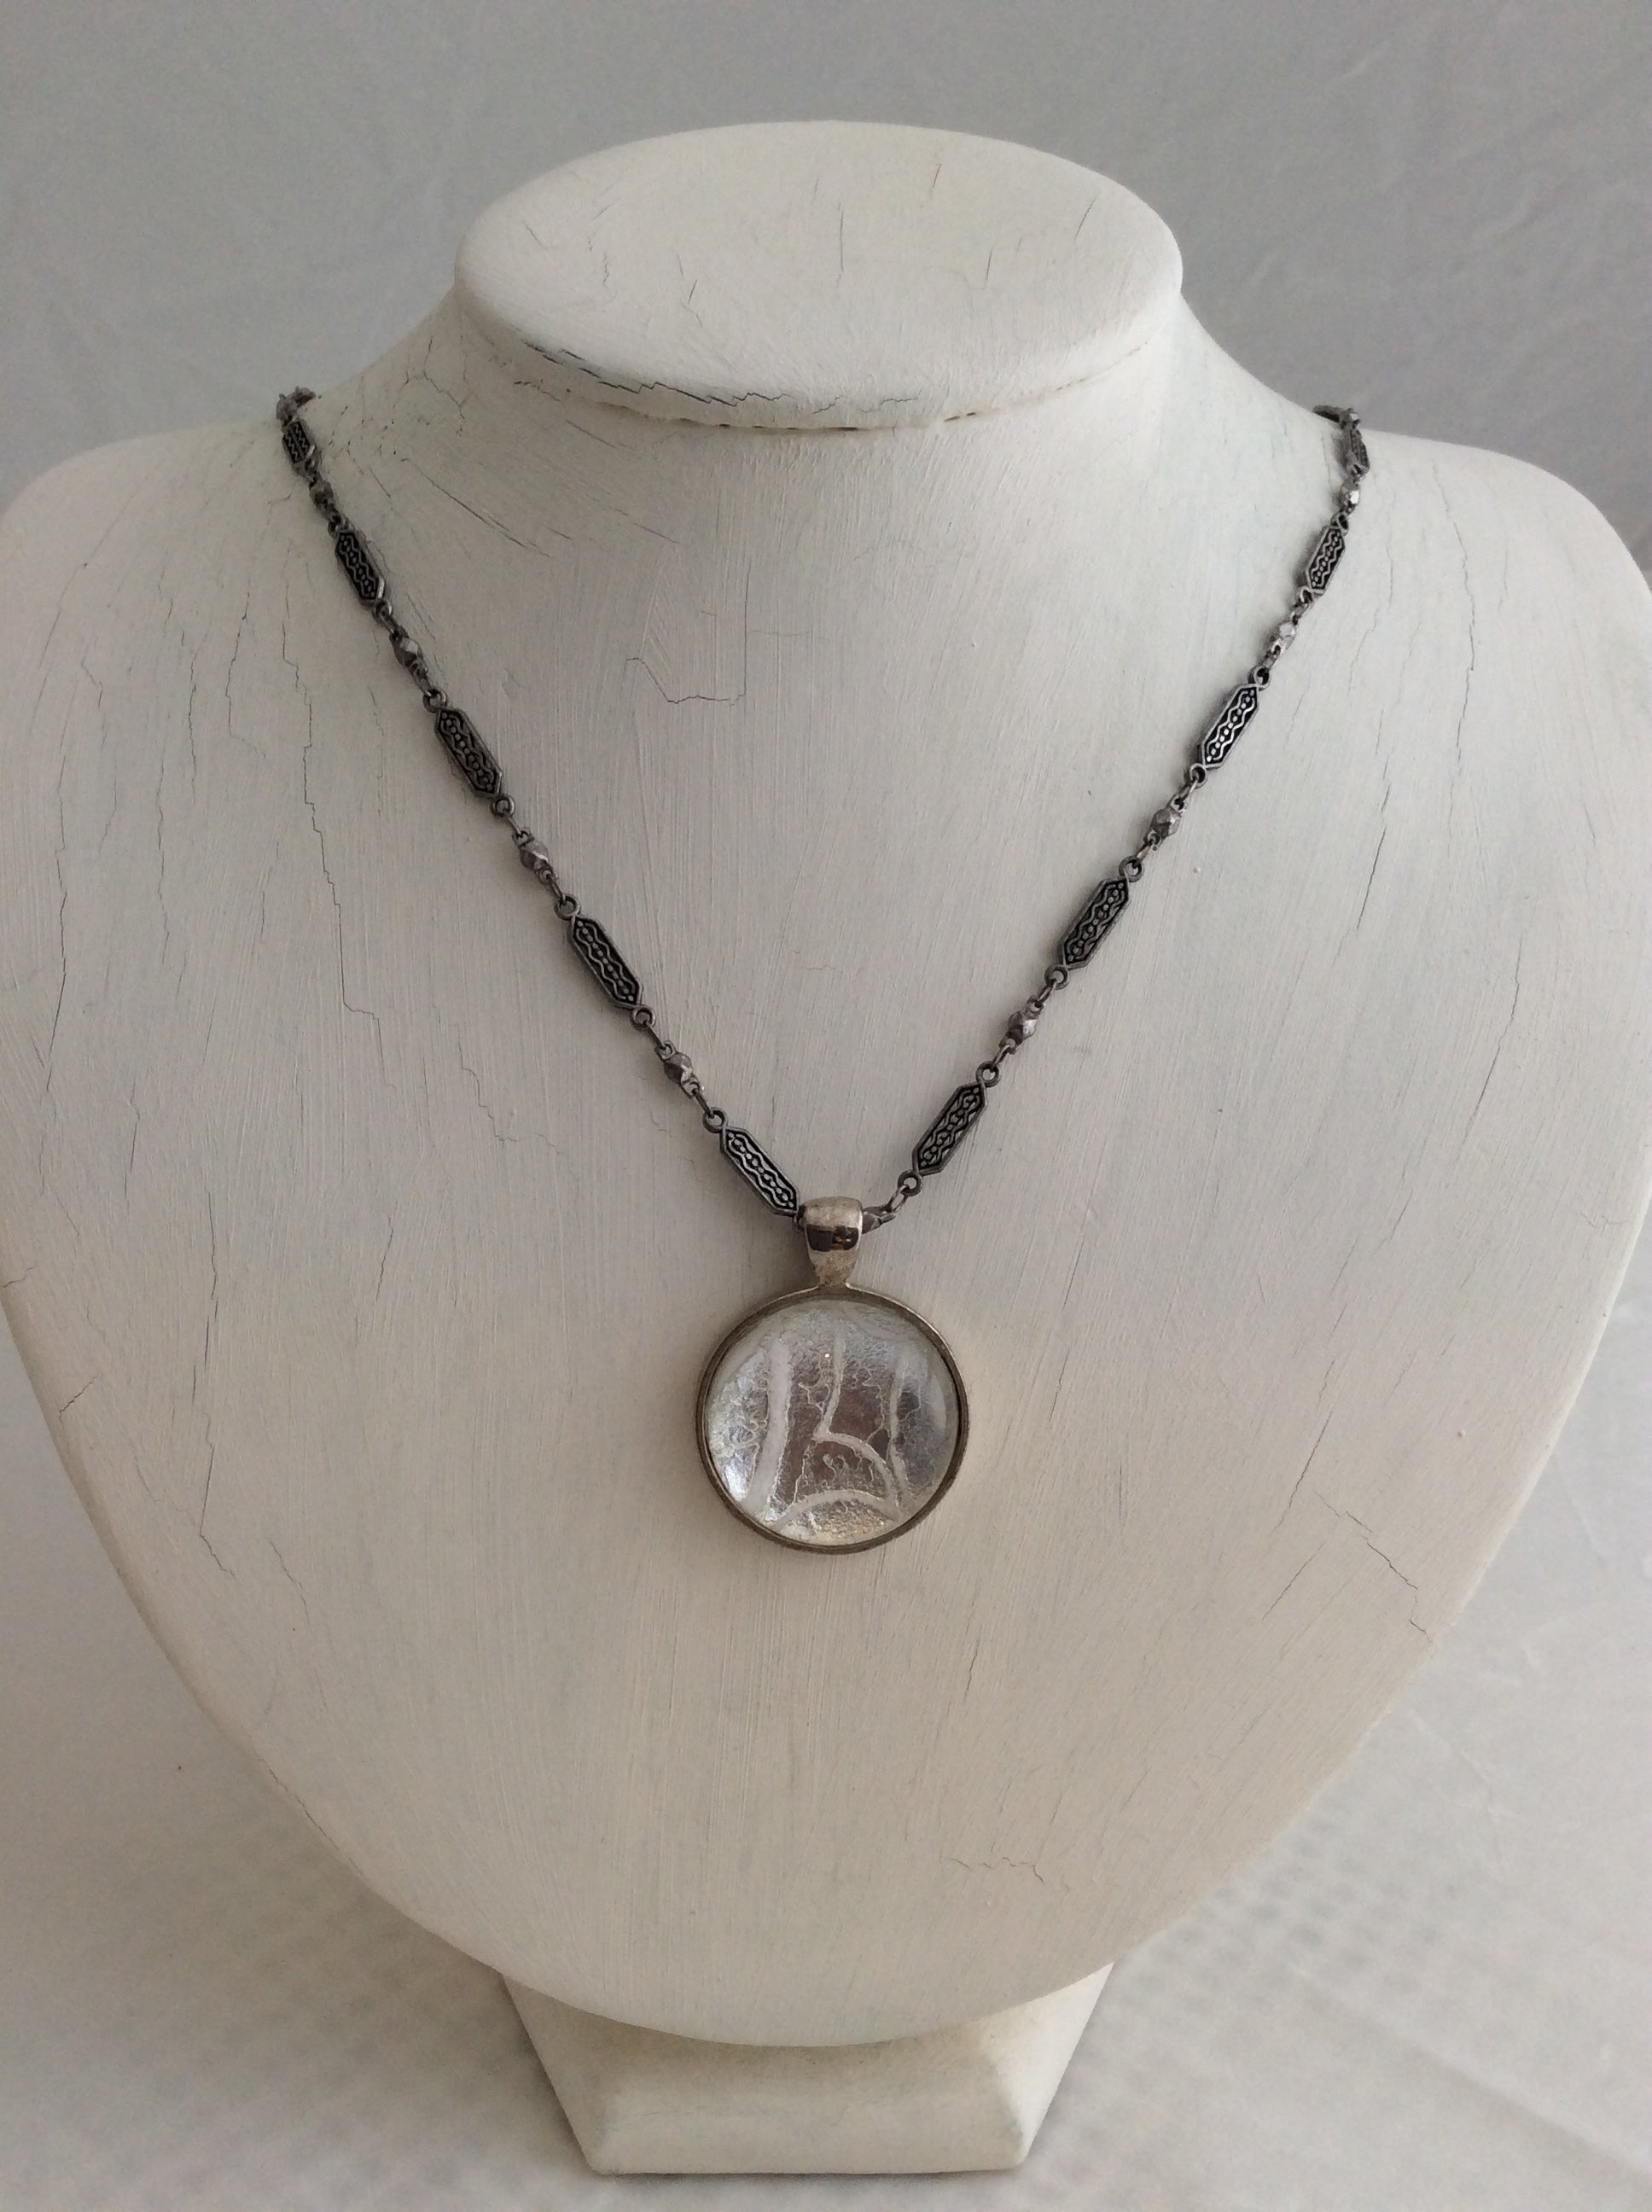 Round Glass, White and Silver Pendant on Silver Chain Necklace - Five and Divine